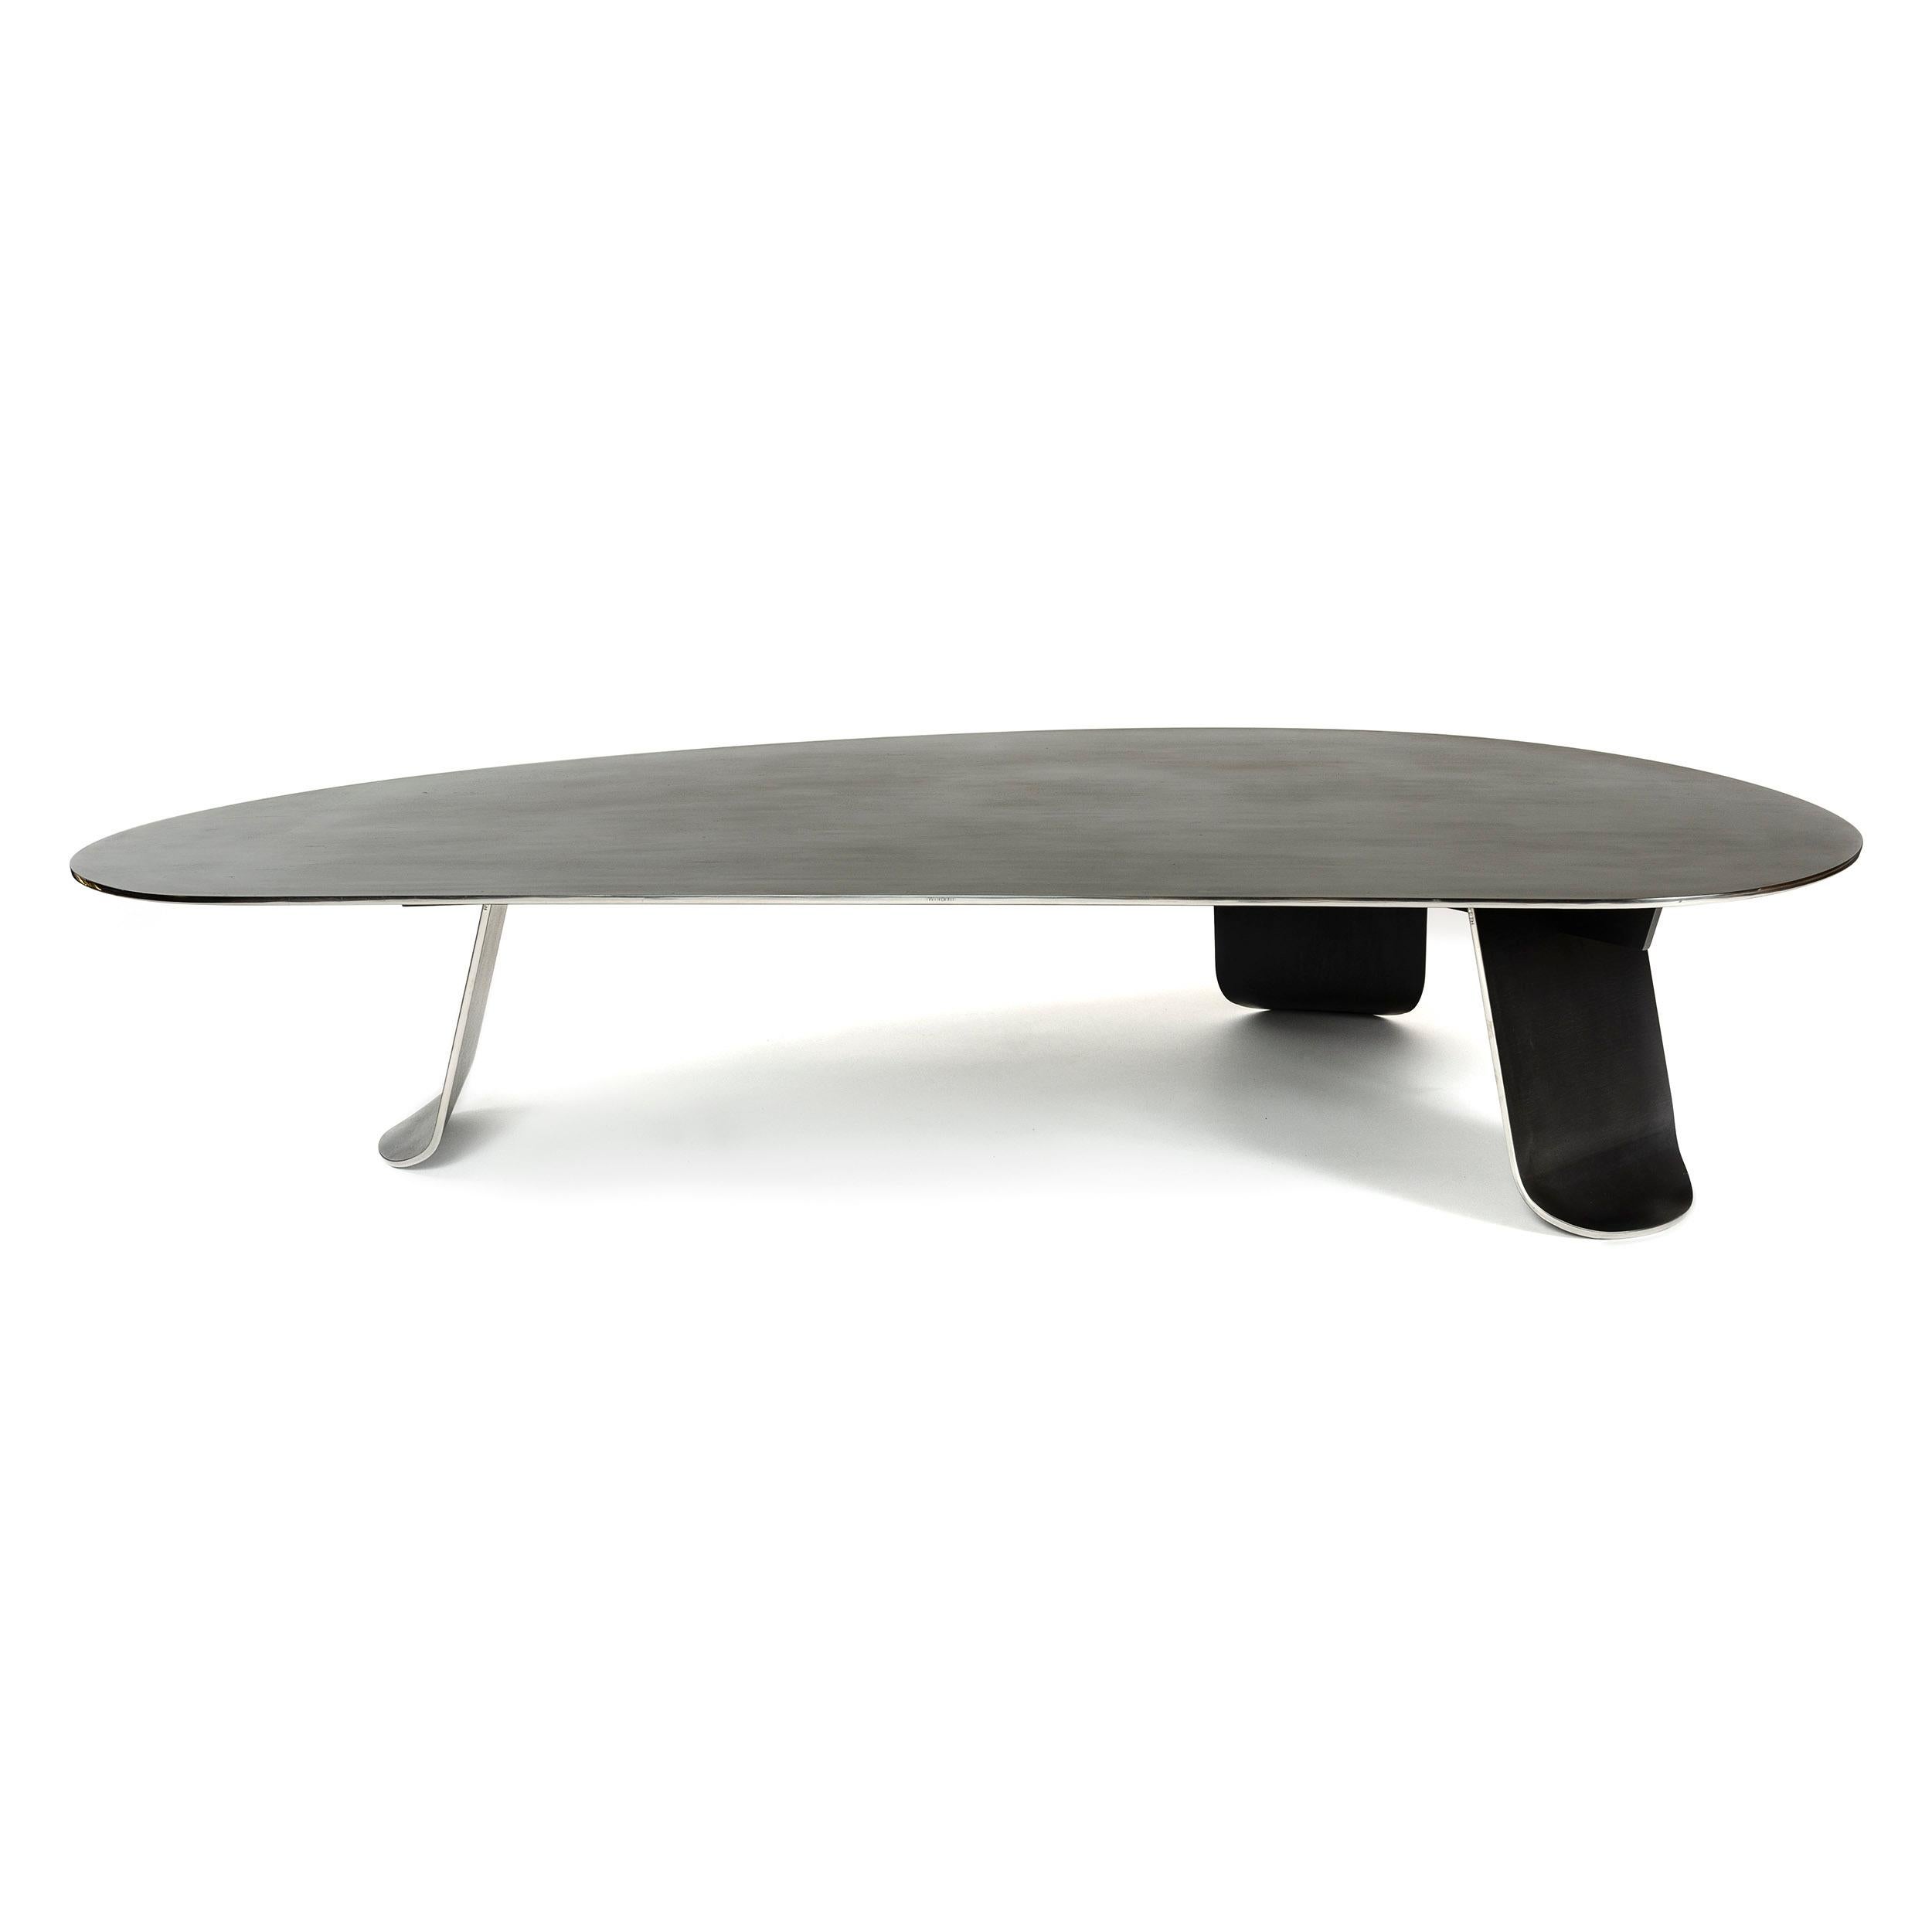 A low coffee / cocktail table of thick, plate steel patinated a low sheen black with a polished edge. The expansive, organically shaped top is set upon three wide, thick plate steel legs each having gradually tapering sides terminating in softened